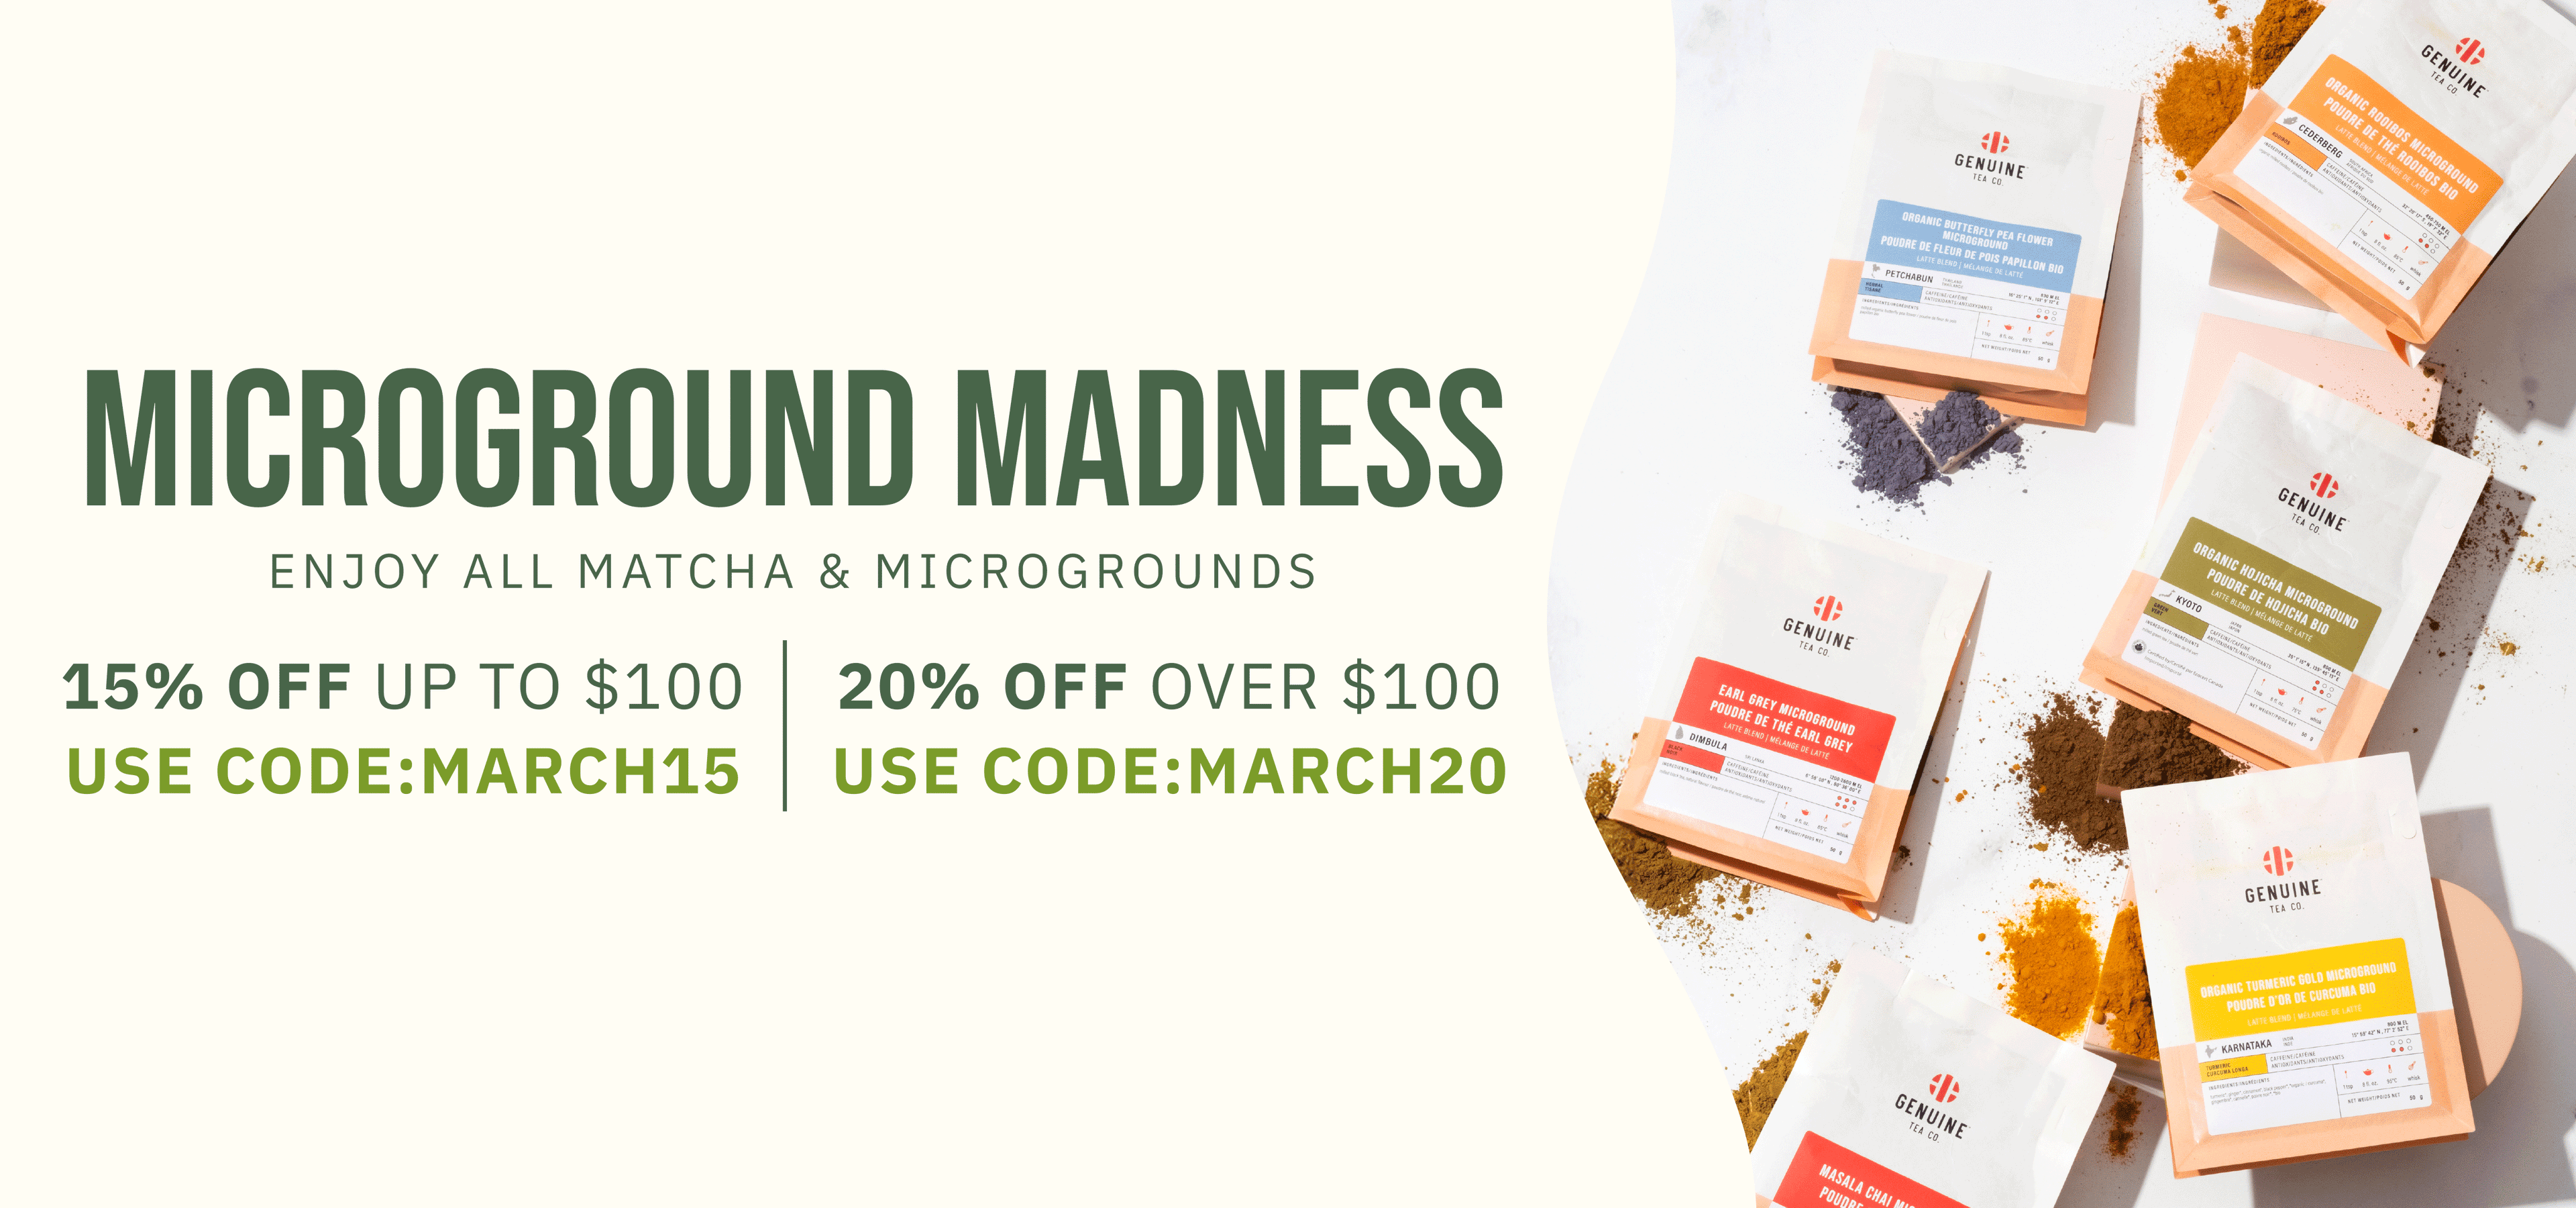 Matcha March Madness. Enjoy all Matcha & Microgrounds. 15% OFF UP TO $100 | USE CODE:MARCH15 20% OFF OVER $100  | USE CODE:MARCH20. 